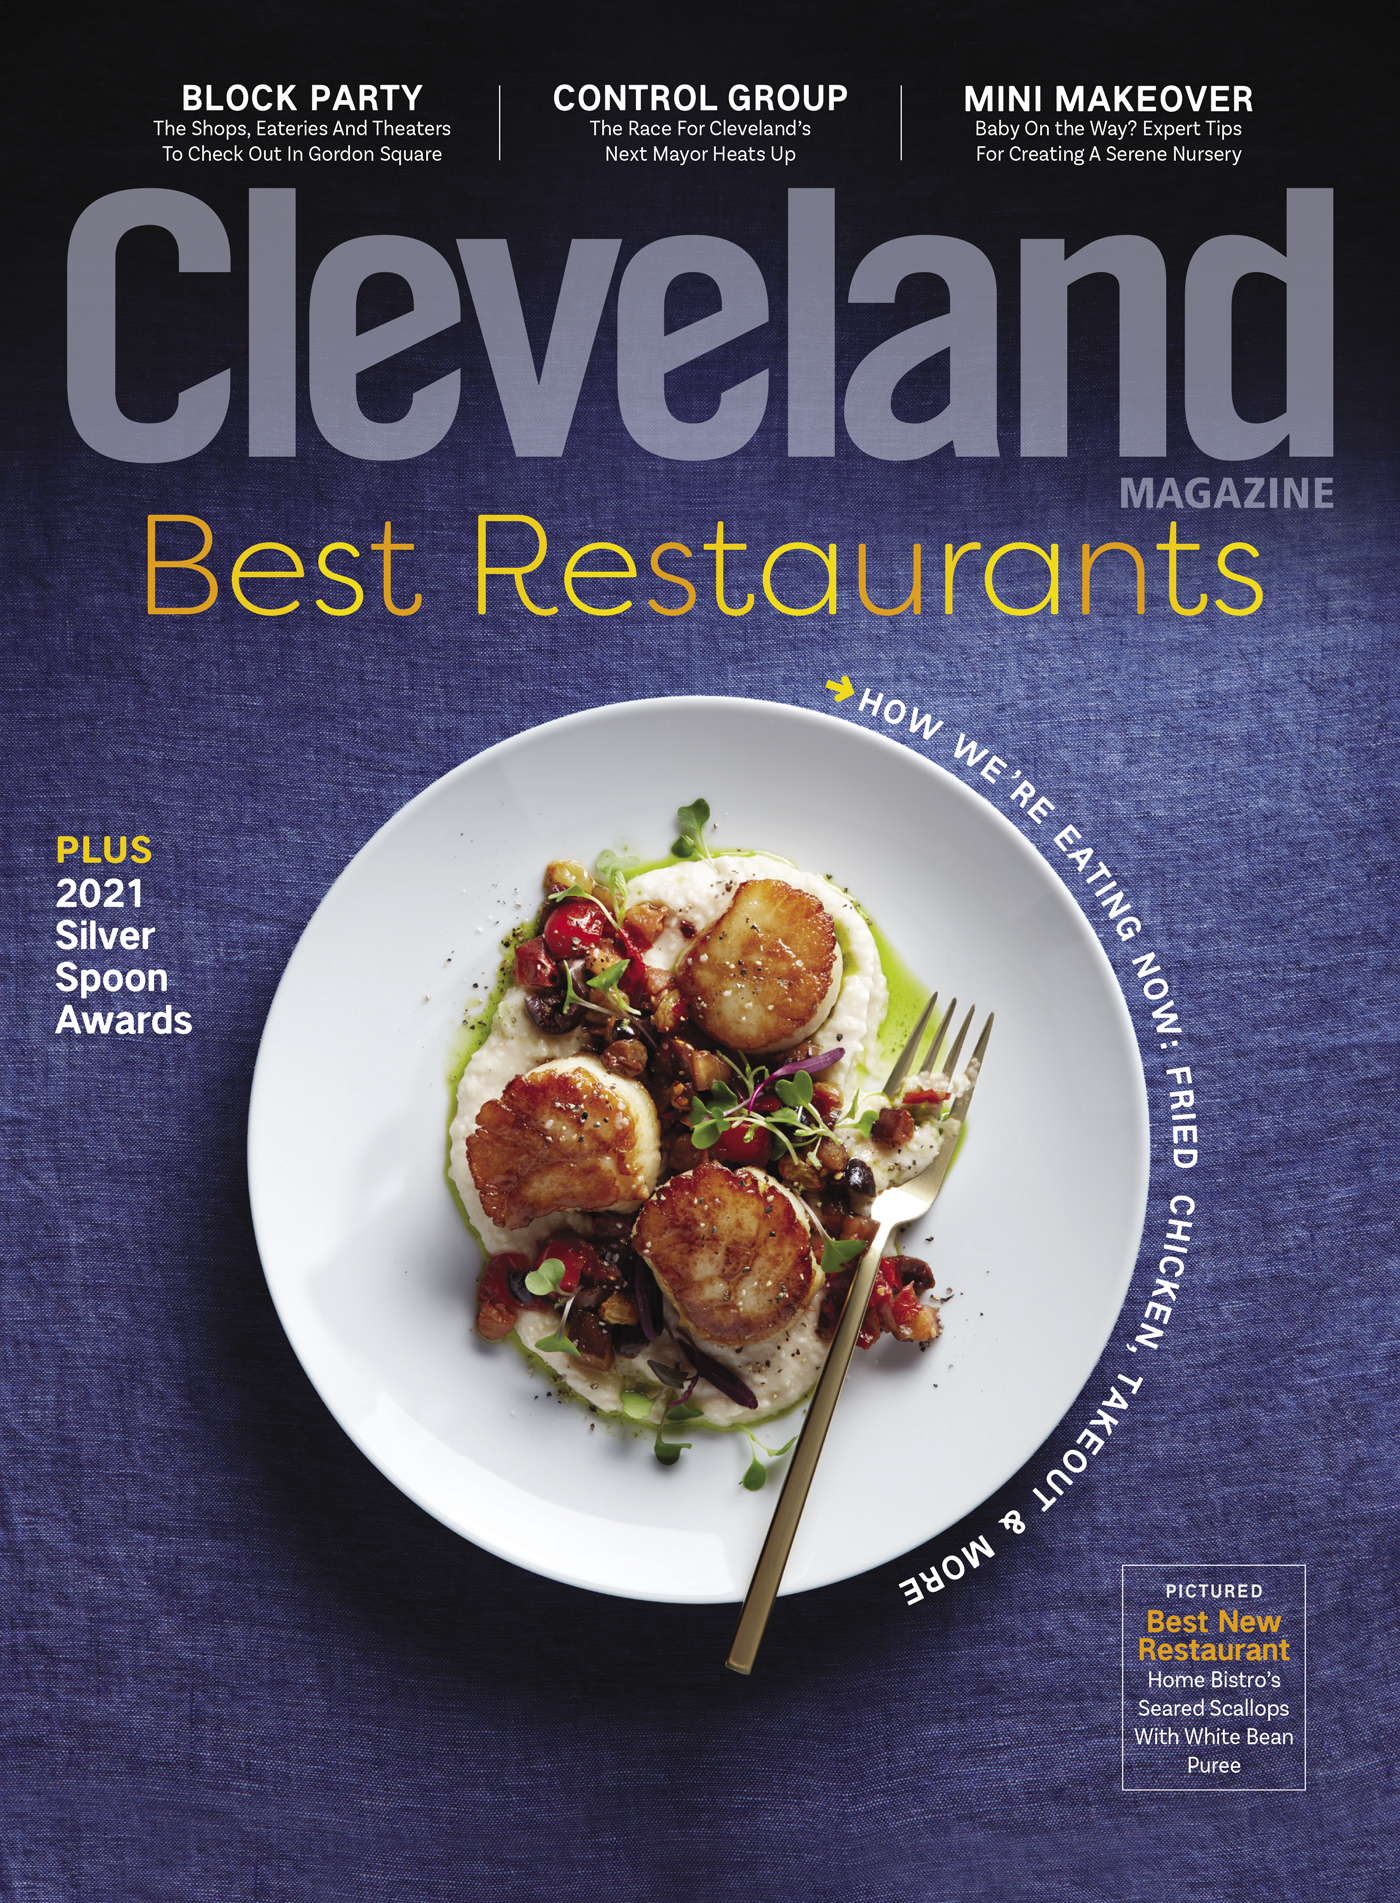 Best Restaurants, May 2021 Cover